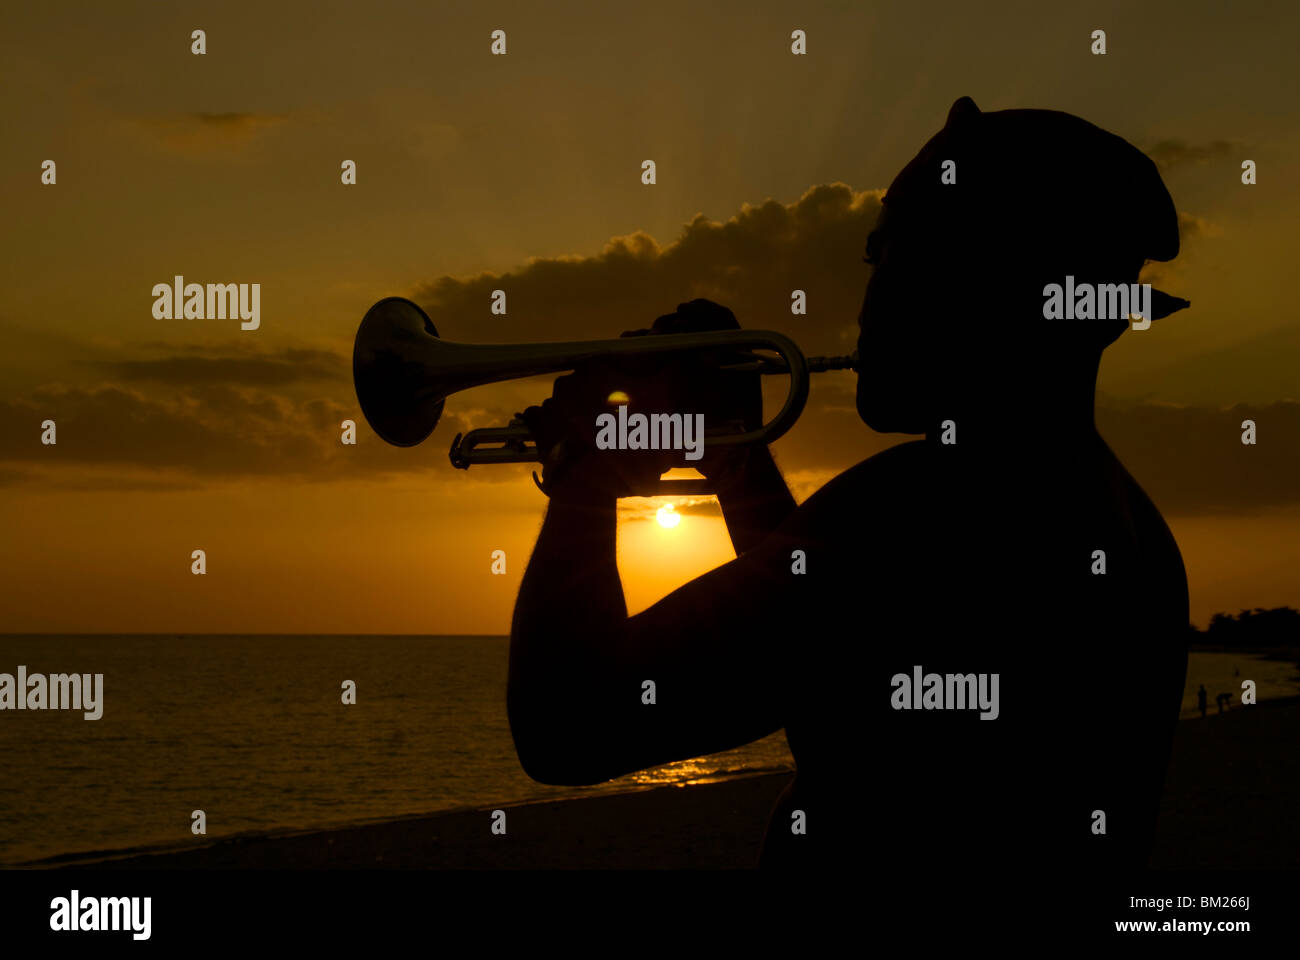 Actor playing the trumpet at sunset, Trinidad, Cuba, West Indies, Central America Stock Photo